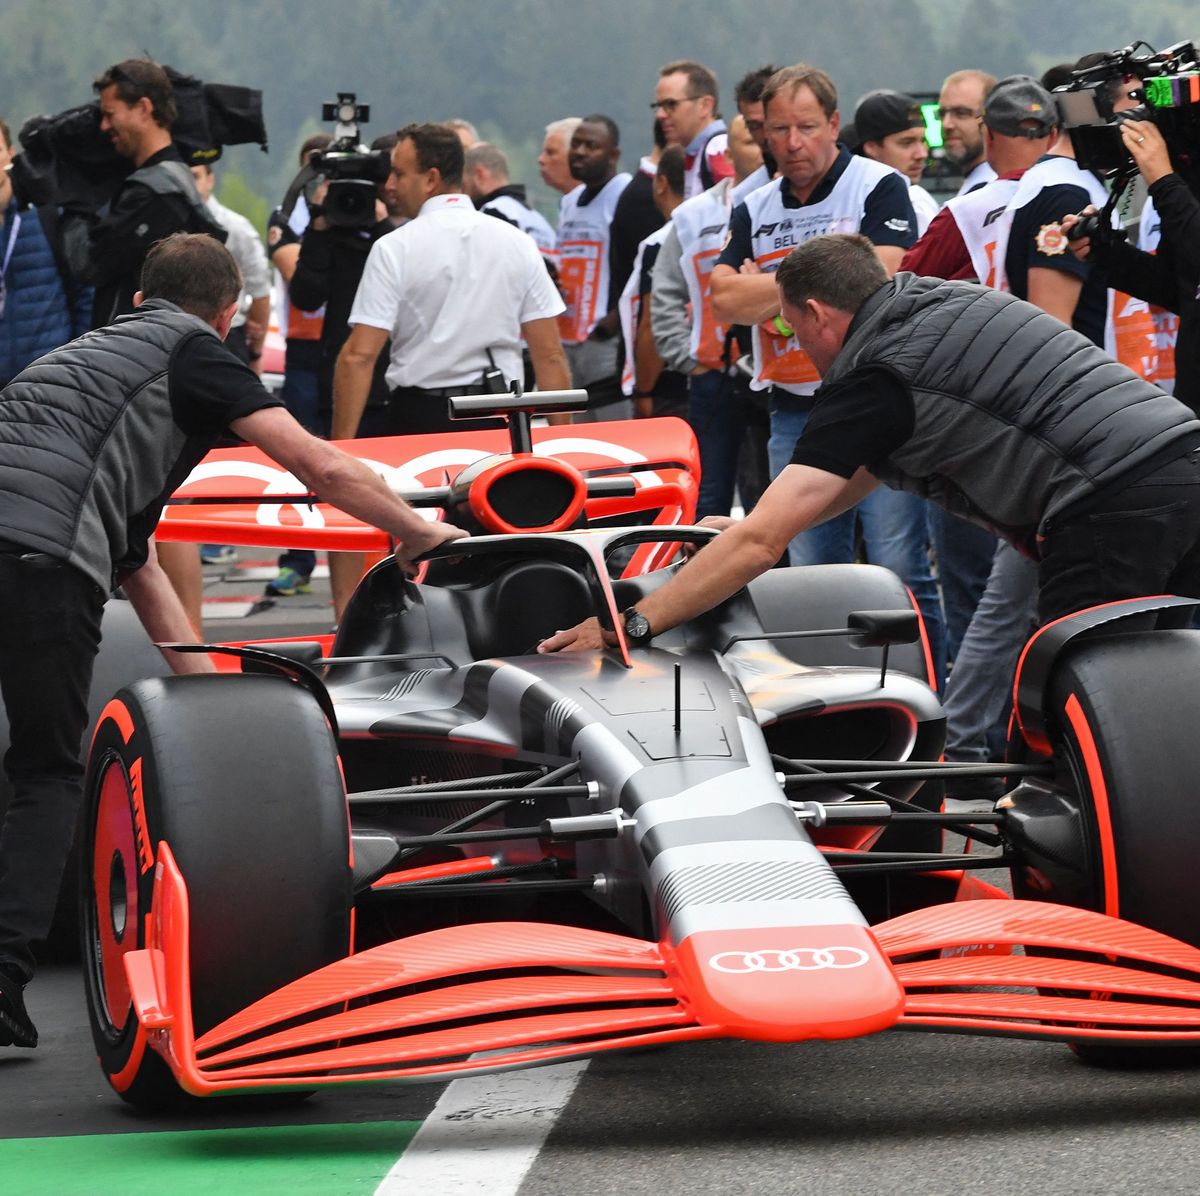 will Formula 1 and other auto racing series introduce car position